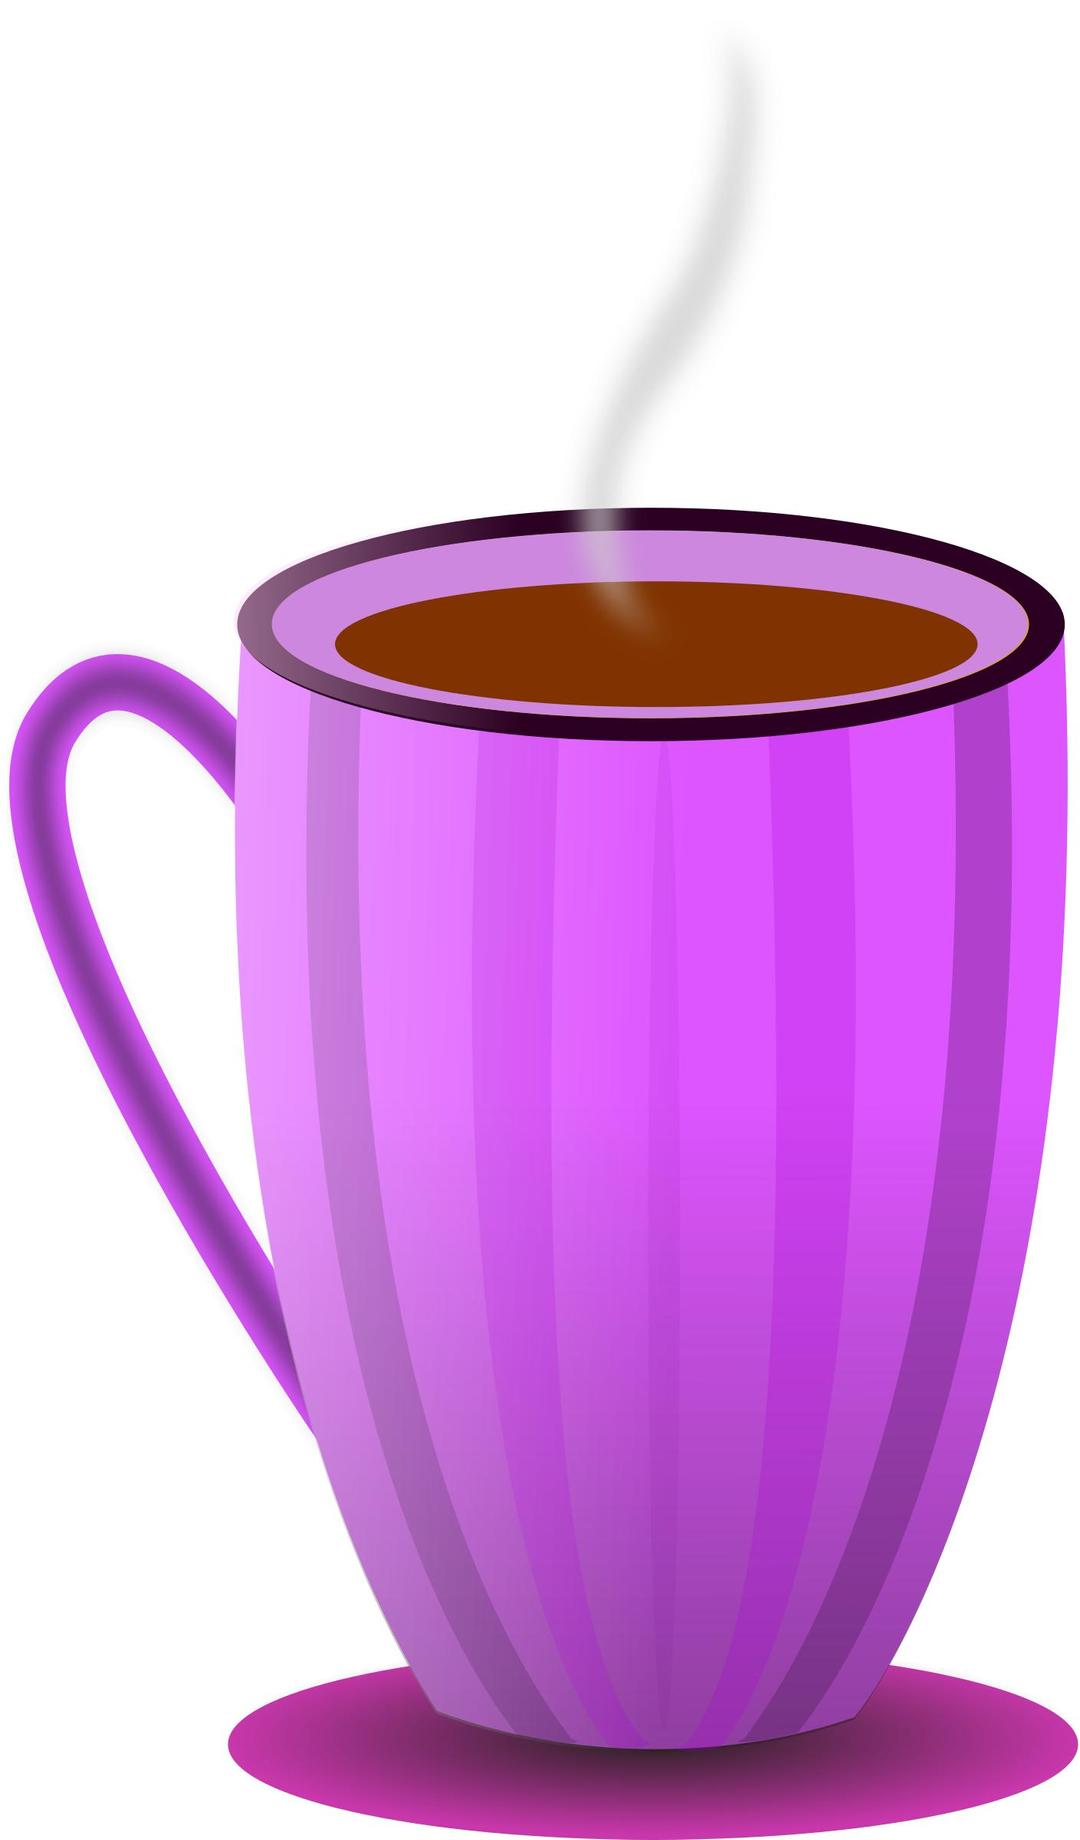 Coffee cup #4 png transparent